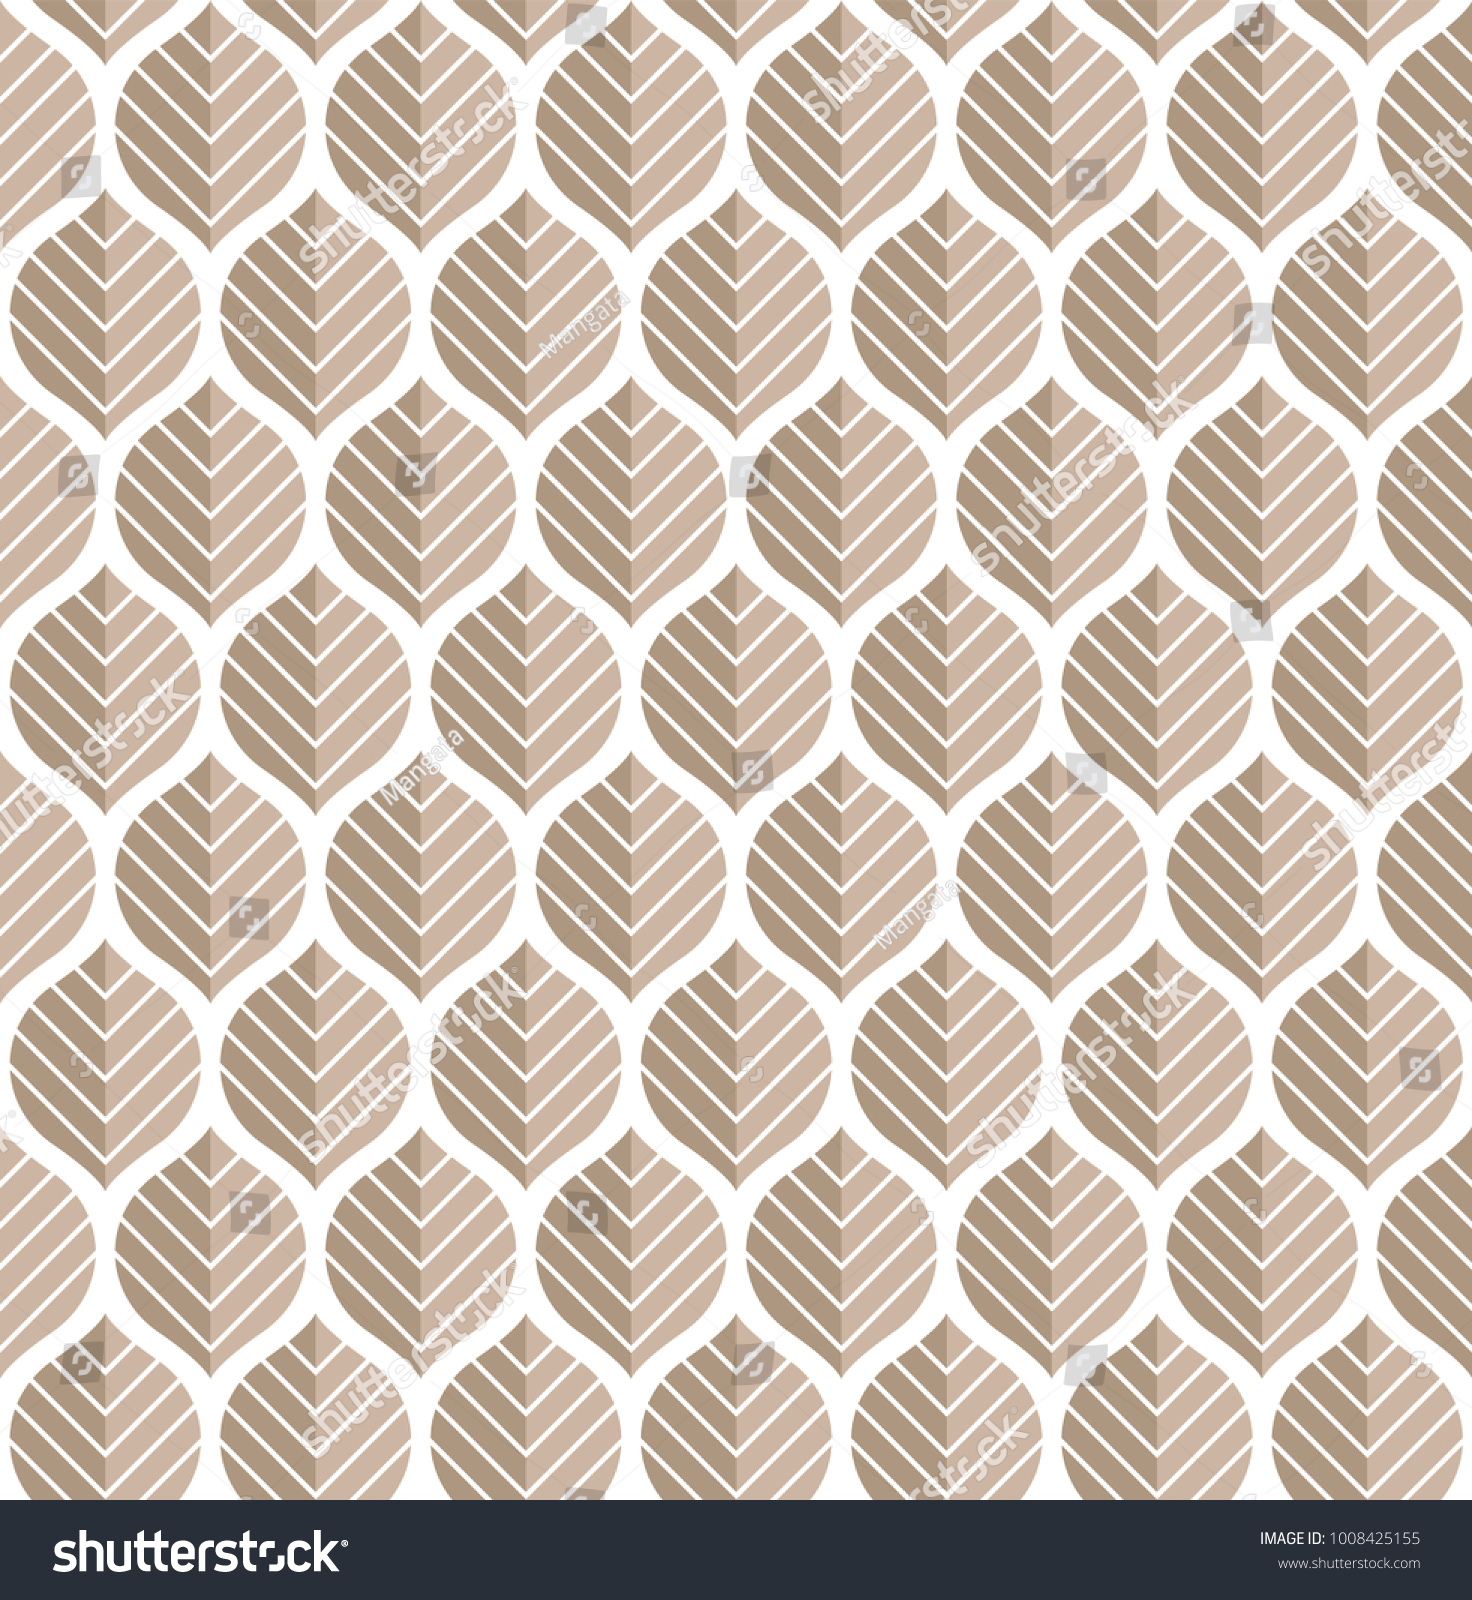 Vector Illustration Leaves Seamless Pattern Floral Stock Vector ...